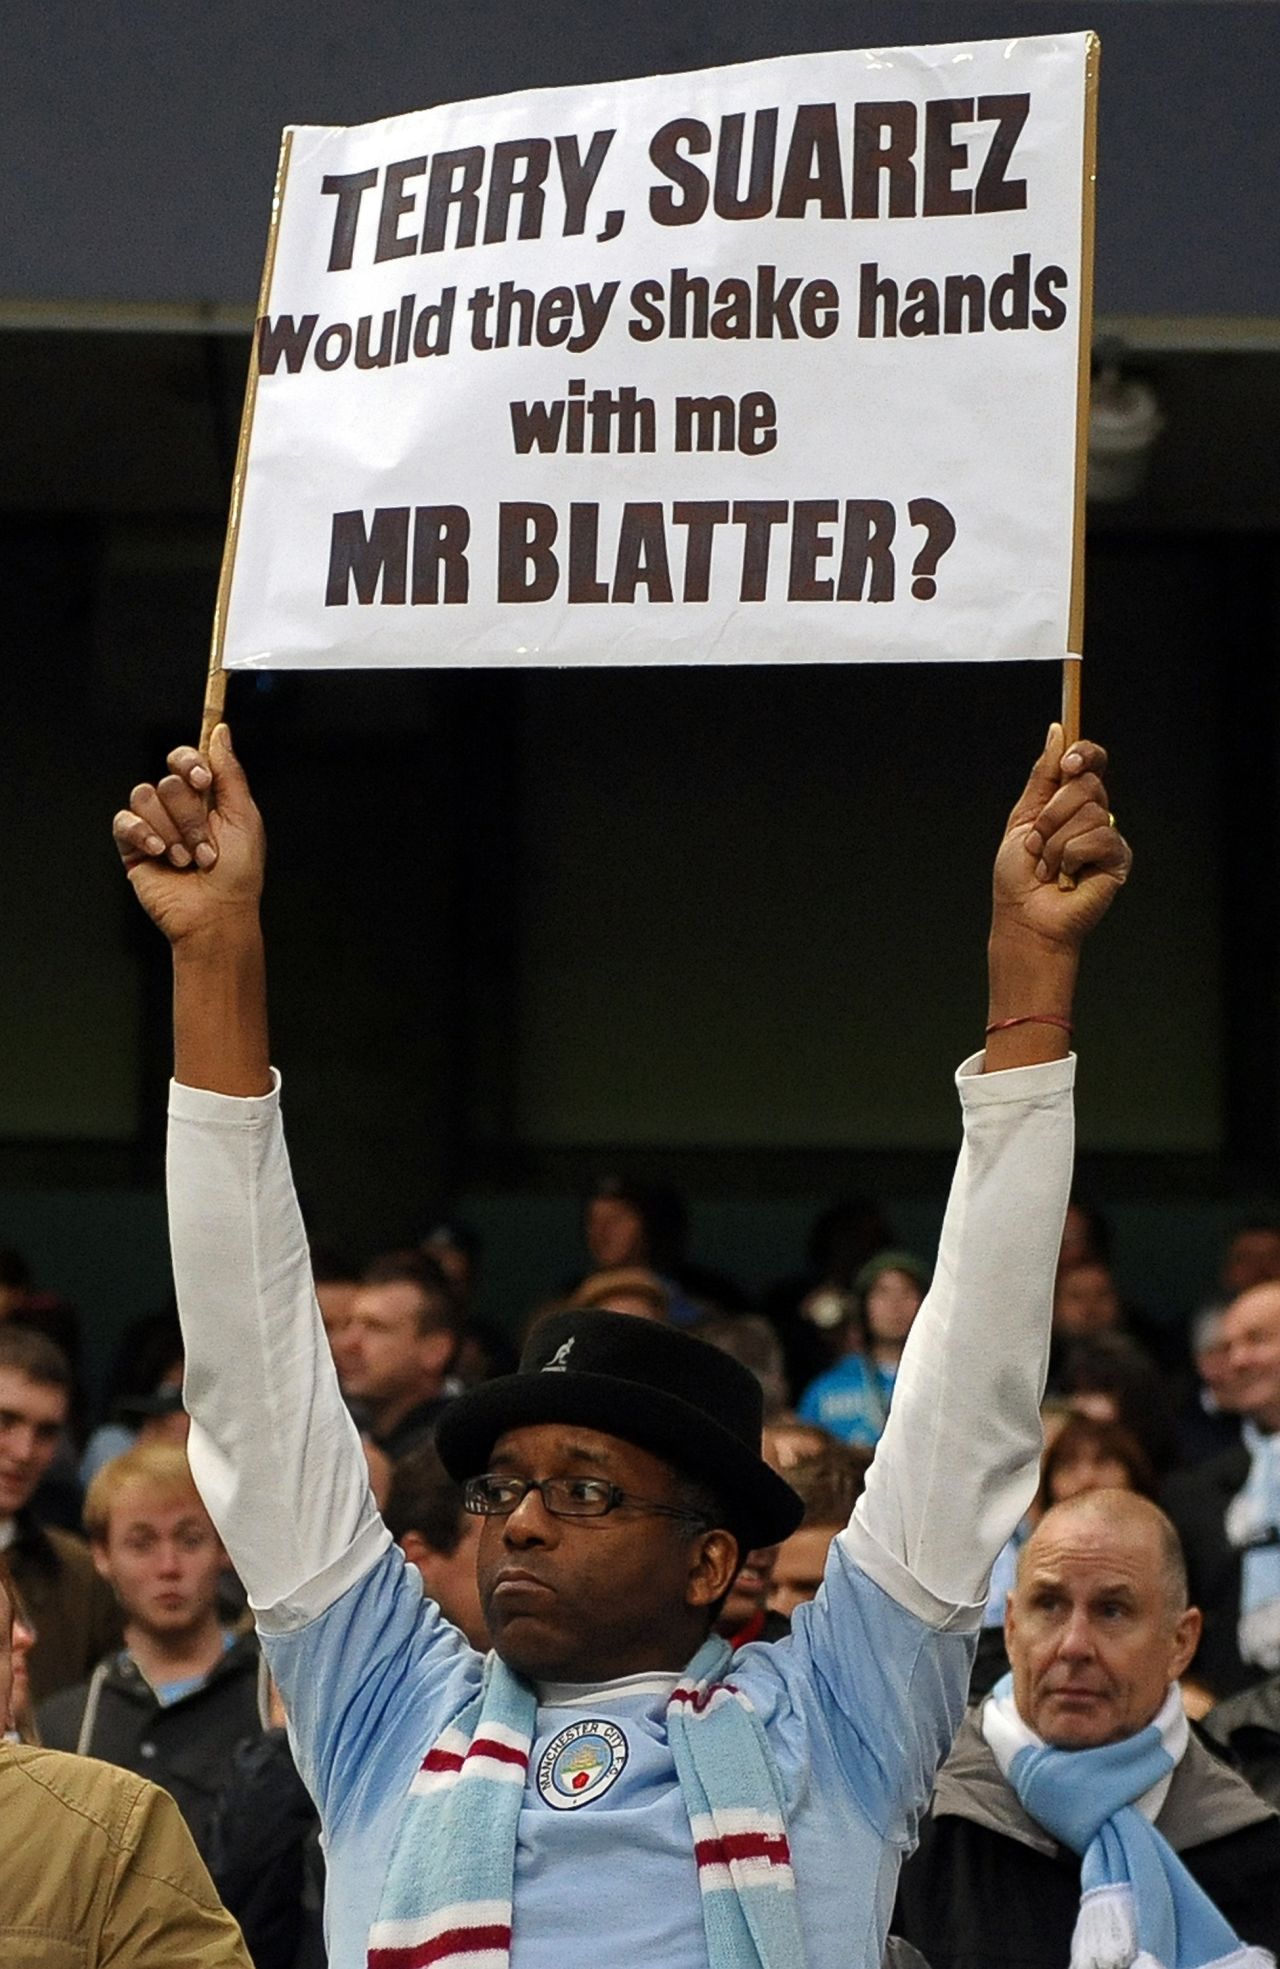 Blatter's new-found vigor to tackle racism was at odds with his sentiments in a 2011 interview with CNN when he expressed his belief that there was no on-field racism in football and that players who think they have been abused should simply say "this is a game." He later said his comments had been misinterpreted.